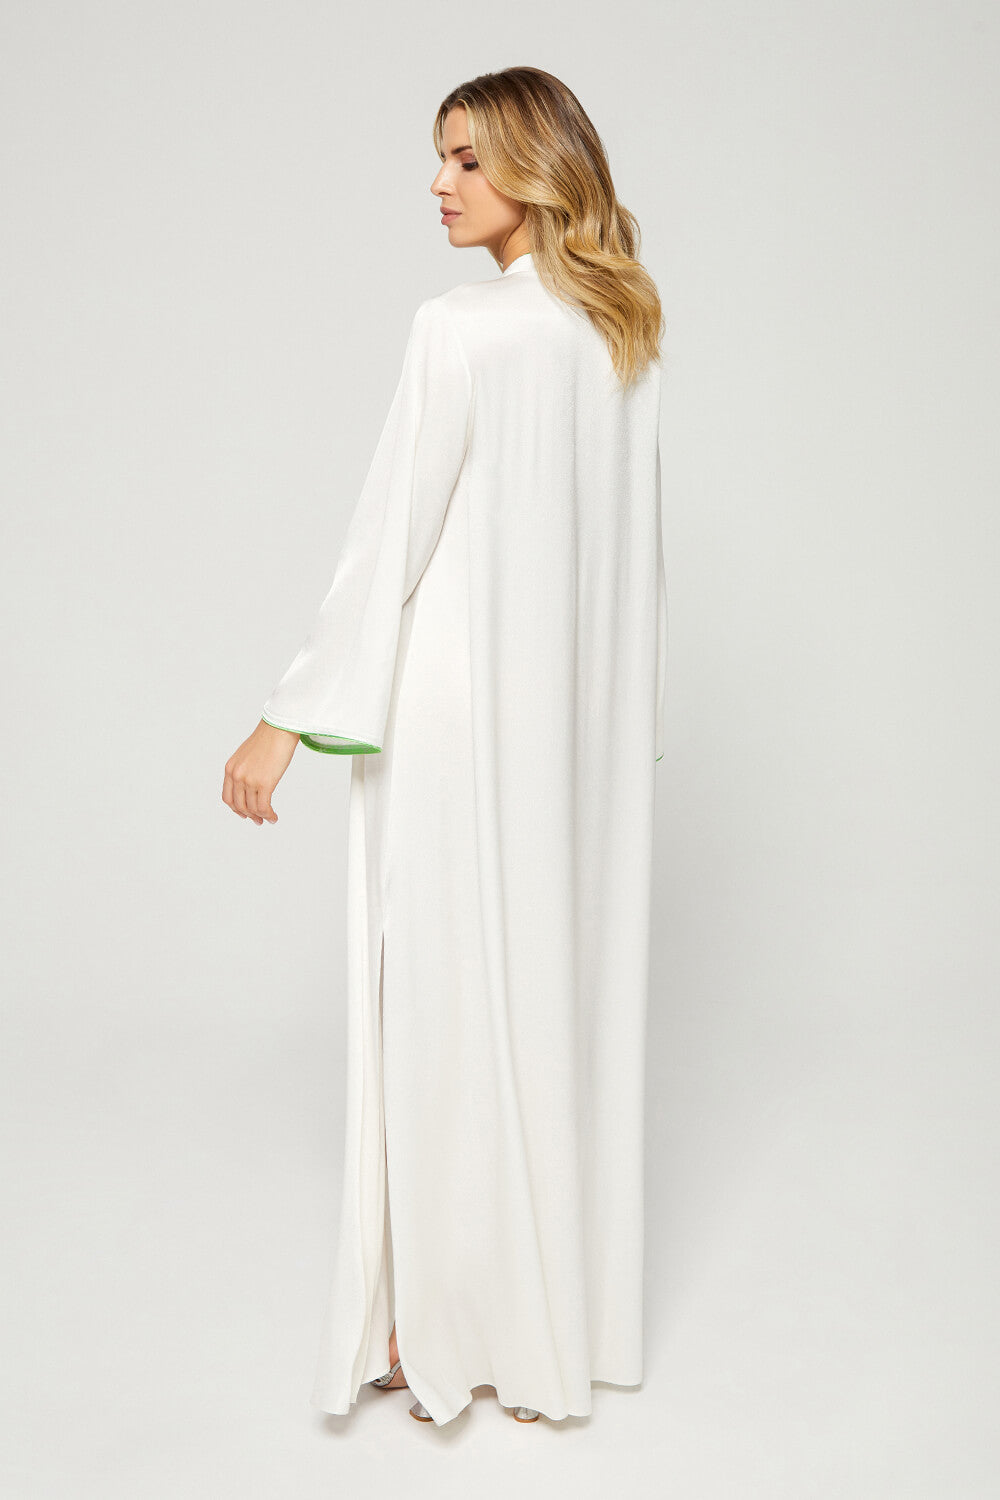 Brusa - Rayon Long Zippered Dress -Off White with Meadow Green Tape Details